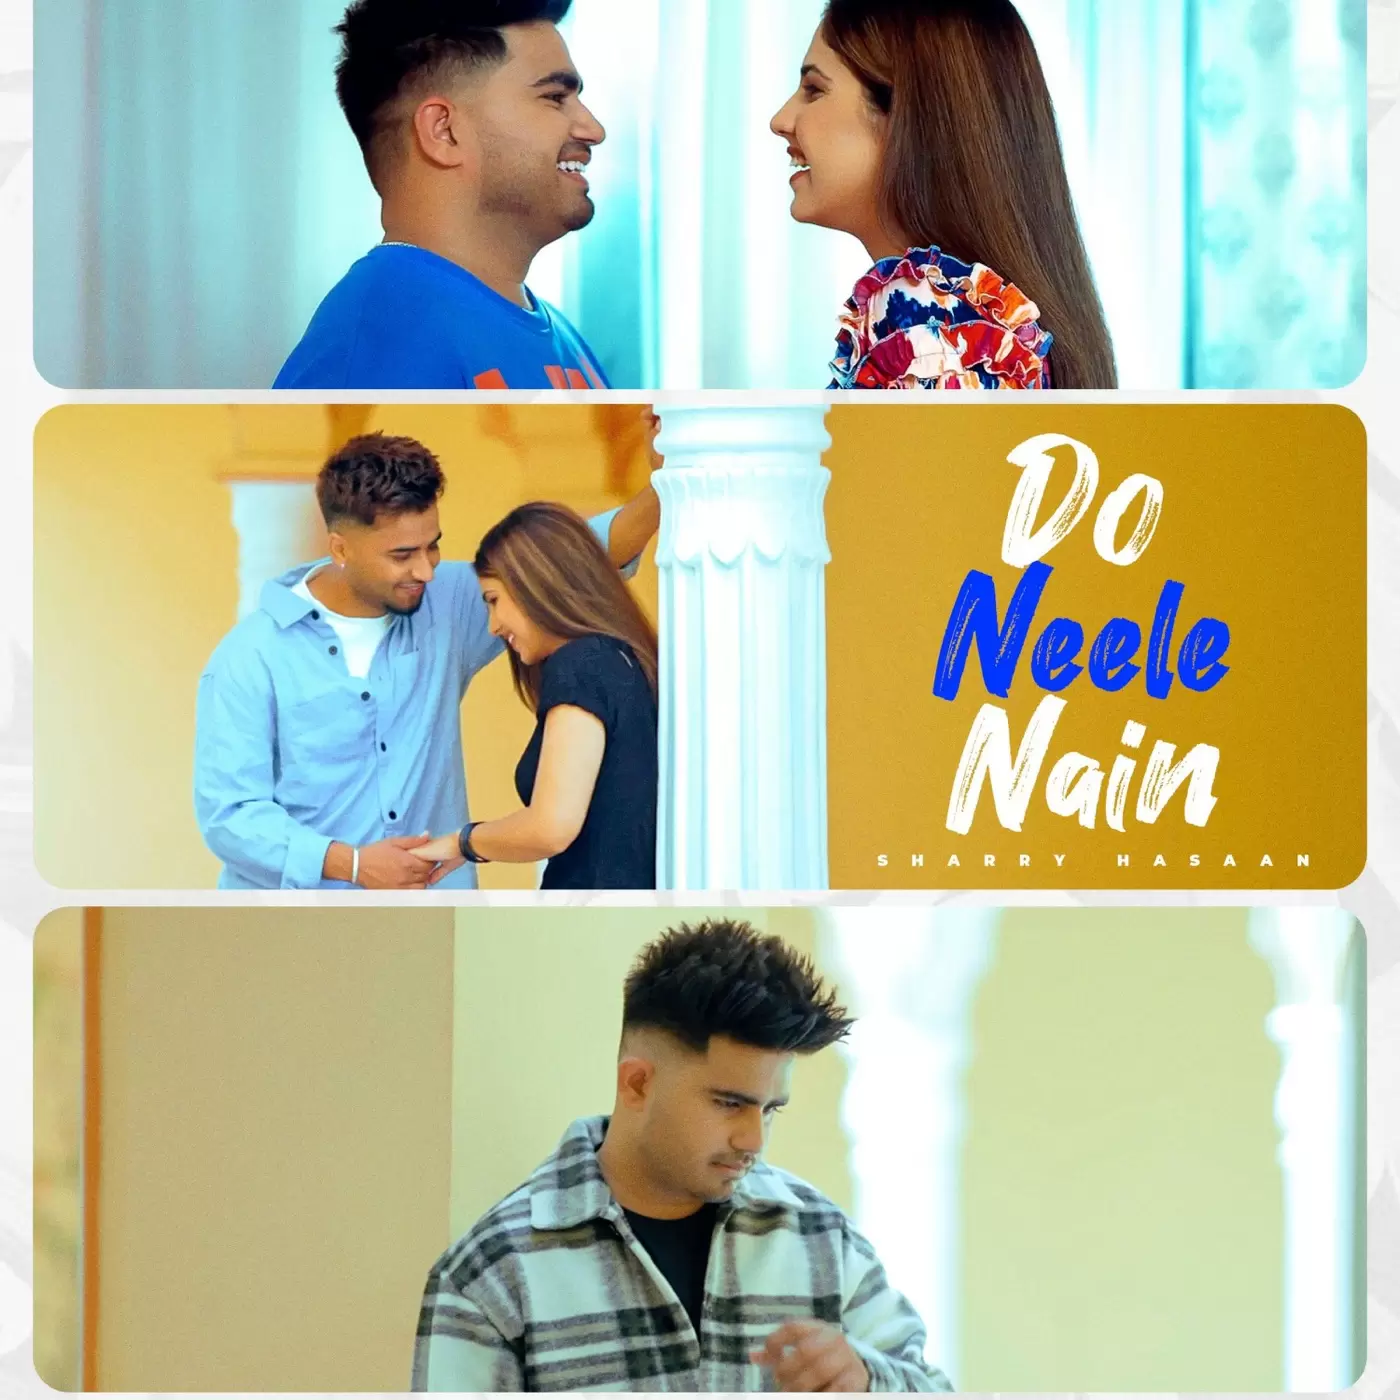 Do Neele Nain Sharry Hassan Mp3 Download Song - Mr-Punjab